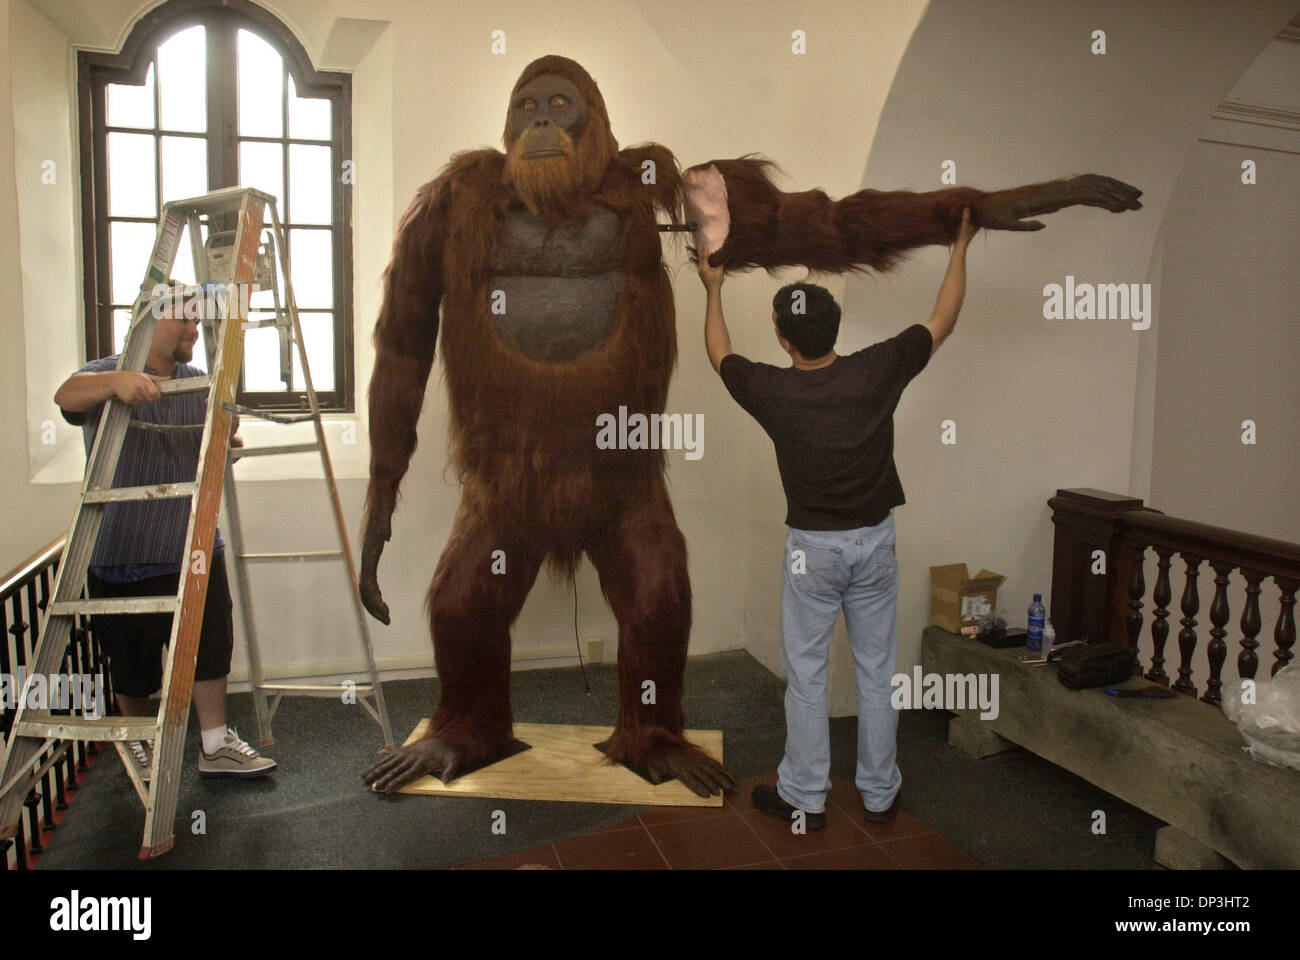 (Published 06/18/2003; B-1:1,2,7; B-2:6): George York, right, designer of the Gigantopithecus replica, attached an arm on his creation after installing it at the Museum of Man in Balboa Park, Monday morning while assistant Wayne Stone, left, looked on. The primate is part of the new Footsteps Through Time exhibit. Stock Photo